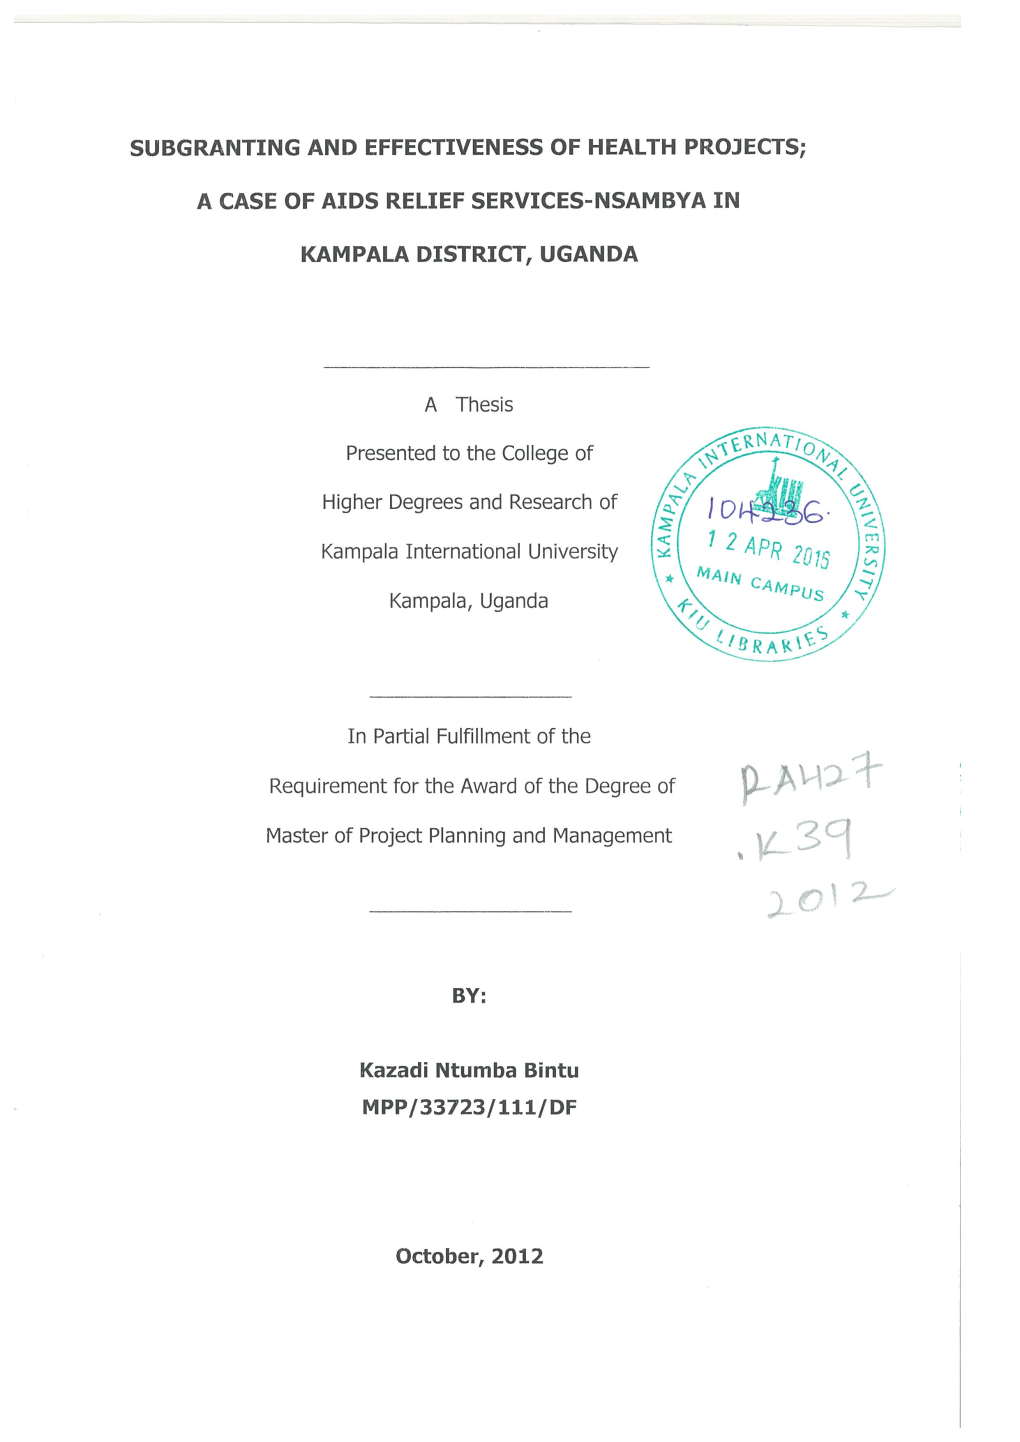 A ASE of AIDS RELIEF SERVICES-NSAMBYA in KAMPALA DISTRICT, UGANDA a Thesis